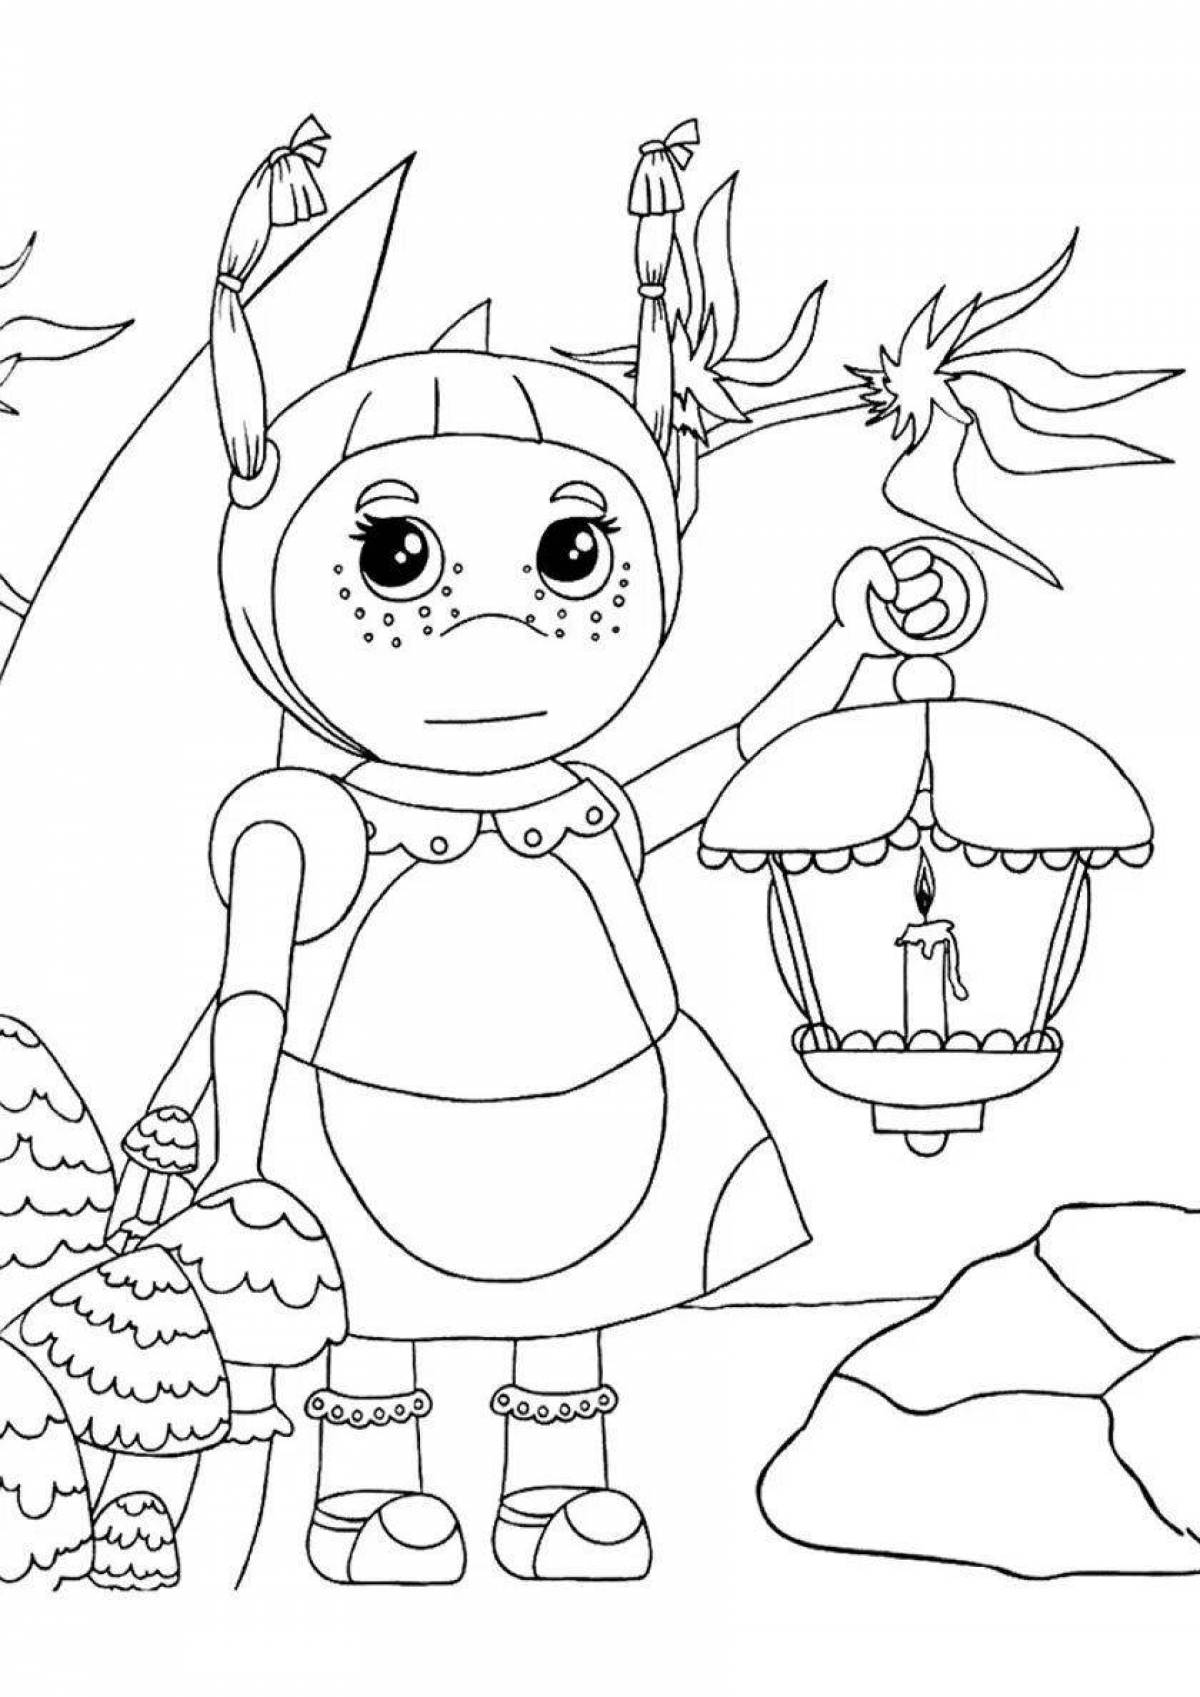 Funny luntik and friends coloring book